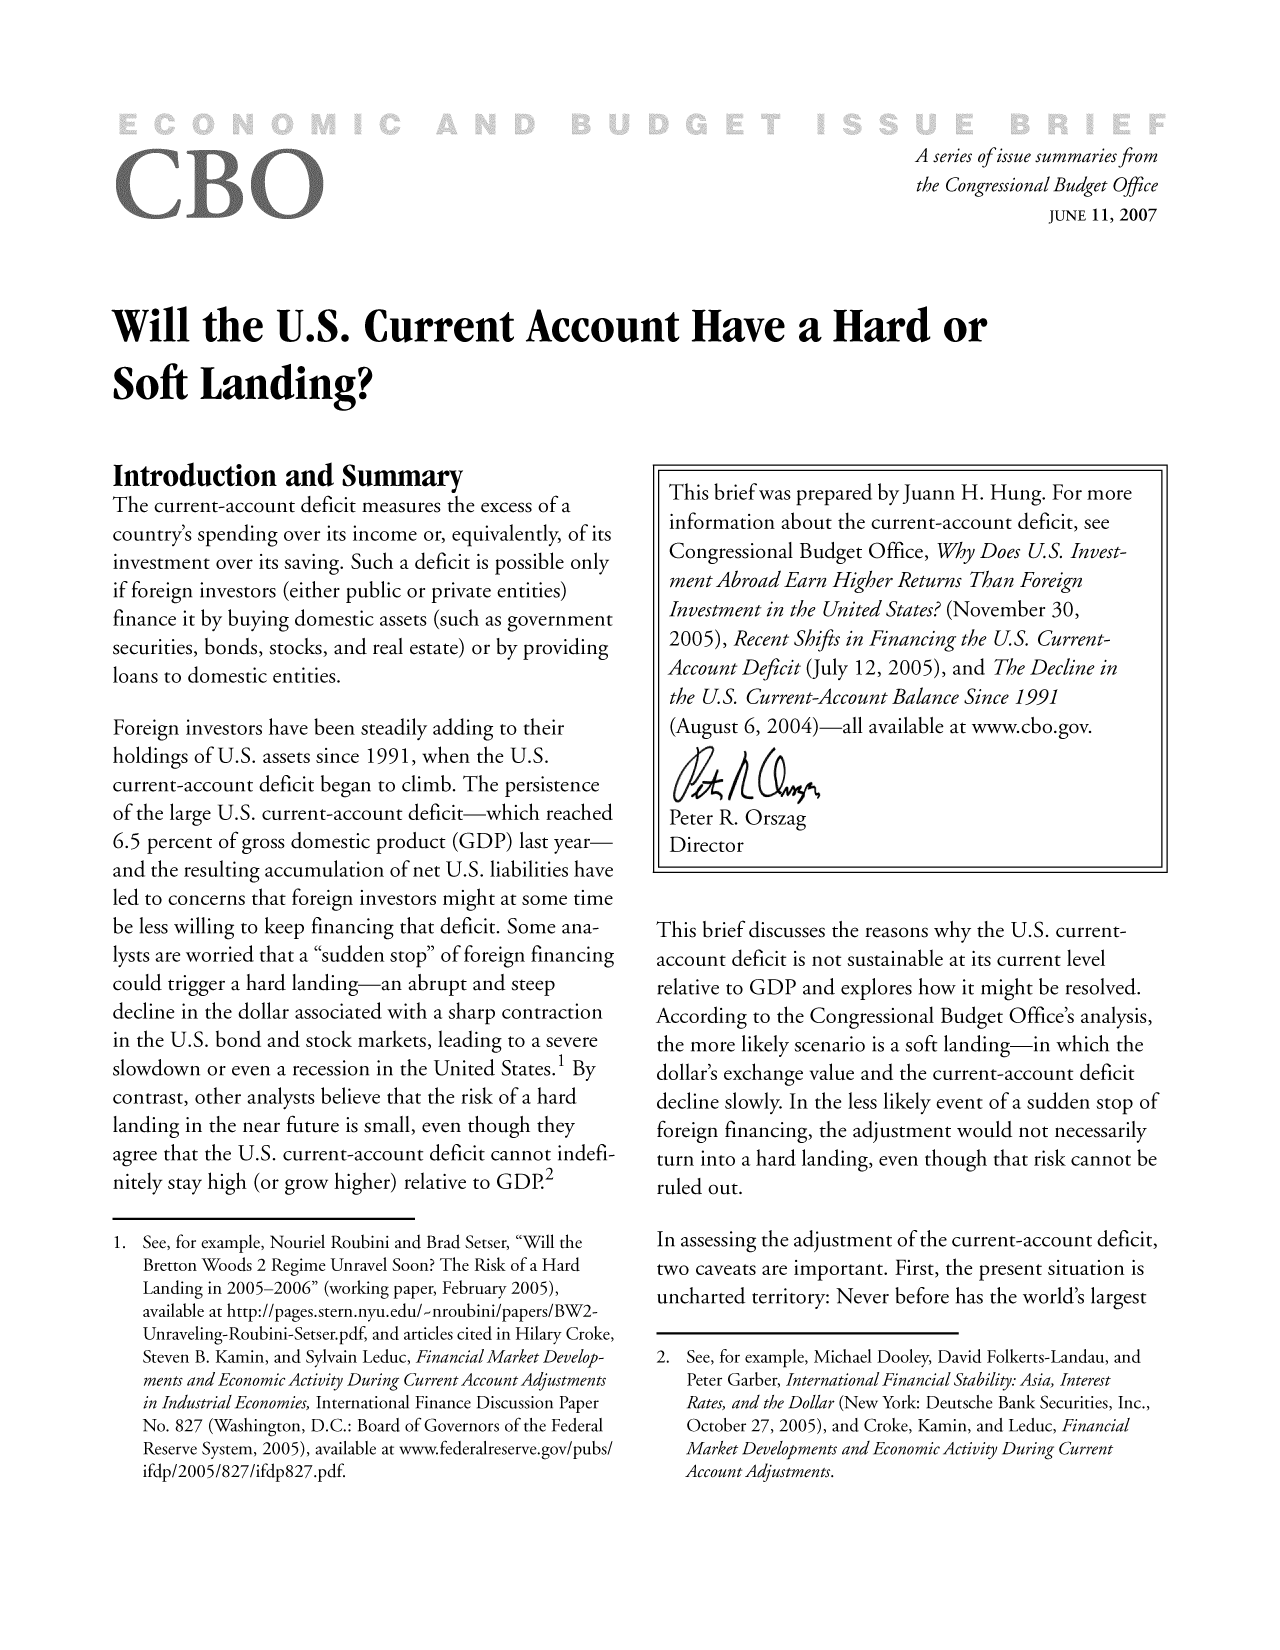 handle is hein.congrec/cbo9576 and id is 1 raw text is: A series ofissue summaries from
the Congressional Budget Office
JUNE 11, 2007
Will the U.S. Current Account Have a Hard or
Soft Landing?

Introduction and Summary
The current-account deficit measures the excess of a
country's spending over its income or, equivalently, of its
investment over its saving. Such a deficit is possible only
if foreign investors (either public or private entities)
finance it by buying domestic assets (such as government
securities, bonds, stocks, and real estate) or by providing
loans to domestic entities.
Foreign investors have been steadily adding to their
holdings of U.S. assets since 1991, when the U.S.
current-account deficit began to climb. The persistence
of the large U.S. current-account deficit-which reached
6.5 percent of gross domestic product (GDP) last year-
and the resulting accumulation of net U.S. liabilities have
led to concerns that foreign investors might at some time
be less willing to keep financing that deficit. Some ana-
lysts are worried that a sudden stop of foreign financing
could trigger a hard landing-an abrupt and steep
decline in the dollar associated with a sharp contraction
in the U.S. bond and stock markets, leading to a severe
slowdown or even a recession in the United States.1 By
contrast, other analysts believe that the risk of a hard
landing in the near future is small, even though they
agree that the U.S. current-account deficit cannot indefi-
nitely stay high (or grow higher) relative to GD.2
1. See, for example, Nouriel Roubini and Brad Setser, Will the
Bretton Woods 2 Regime Unravel Soon? The Risk of a Hard
Landing in 2005-2006 (working paper, February 2005),
available at http://pages.stern.nyu.edu/,nroubini/papers/BW2-
Unraveling-Roubini-Setser.pdf, and articles cited in Hilary Croke,
Steven B. Kamin, and Sylvain Leduc, Financial Market Develop-
ments and Economic Activity During Current Account Adjustments
in Industrial Economies, International Finance Discussion Paper
No. 827 (Washington, D.C.: Board of Governors of the Federal
Reserve System, 2005), available at www.federalreserve.gov/pubs/
ifdp/2005/827/ifdp827.pdf.

This brief was prepared by Juann H. Hung. For more
information about the current-account deficit, see
Congressional Budget Office, Why Does U.S. Invest-
ment Abroad Earn Higher Returns Than Foreign
Investment in the United States? (November 30,
2005), Recent Shifts in Financing the U.S. Current-
Account Deficit (July 12, 2005), and The Decline in
the U.S. Current-Account Balance Since 1991
(August 6, 2004)-all available at www.cbo.gov.
Peter R. Orszag
Director
This brief discusses the reasons why the U.S. current-
account deficit is not sustainable at its current level
relative to GDP and explores how it might be resolved.
According to the Congressional Budget Office's analysis,
the more likely scenario is a soft landing-in which the
dollar's exchange value and the current-account deficit
decline slowly. In the less likely event of a sudden stop of
foreign financing, the adjustment would not necessarily
turn into a hard landing, even though that risk cannot be
ruled out.
In assessing the adjustment of the current-account deficit,
two caveats are important. First, the present situation is
uncharted territory: Never before has the world's largest
2. See, for example, Michael Dooley, David Folkerts-Landau, and
Peter Garber, International Financial Stability: Asia, Interest
Rates, and the Dollar (New York: Deutsche Bank Securities, Inc.,
October 27, 2005), and Croke, Kamin, and Leduc, Financial
Market Developments and Economic Activity During Current
Account Adjustments.


